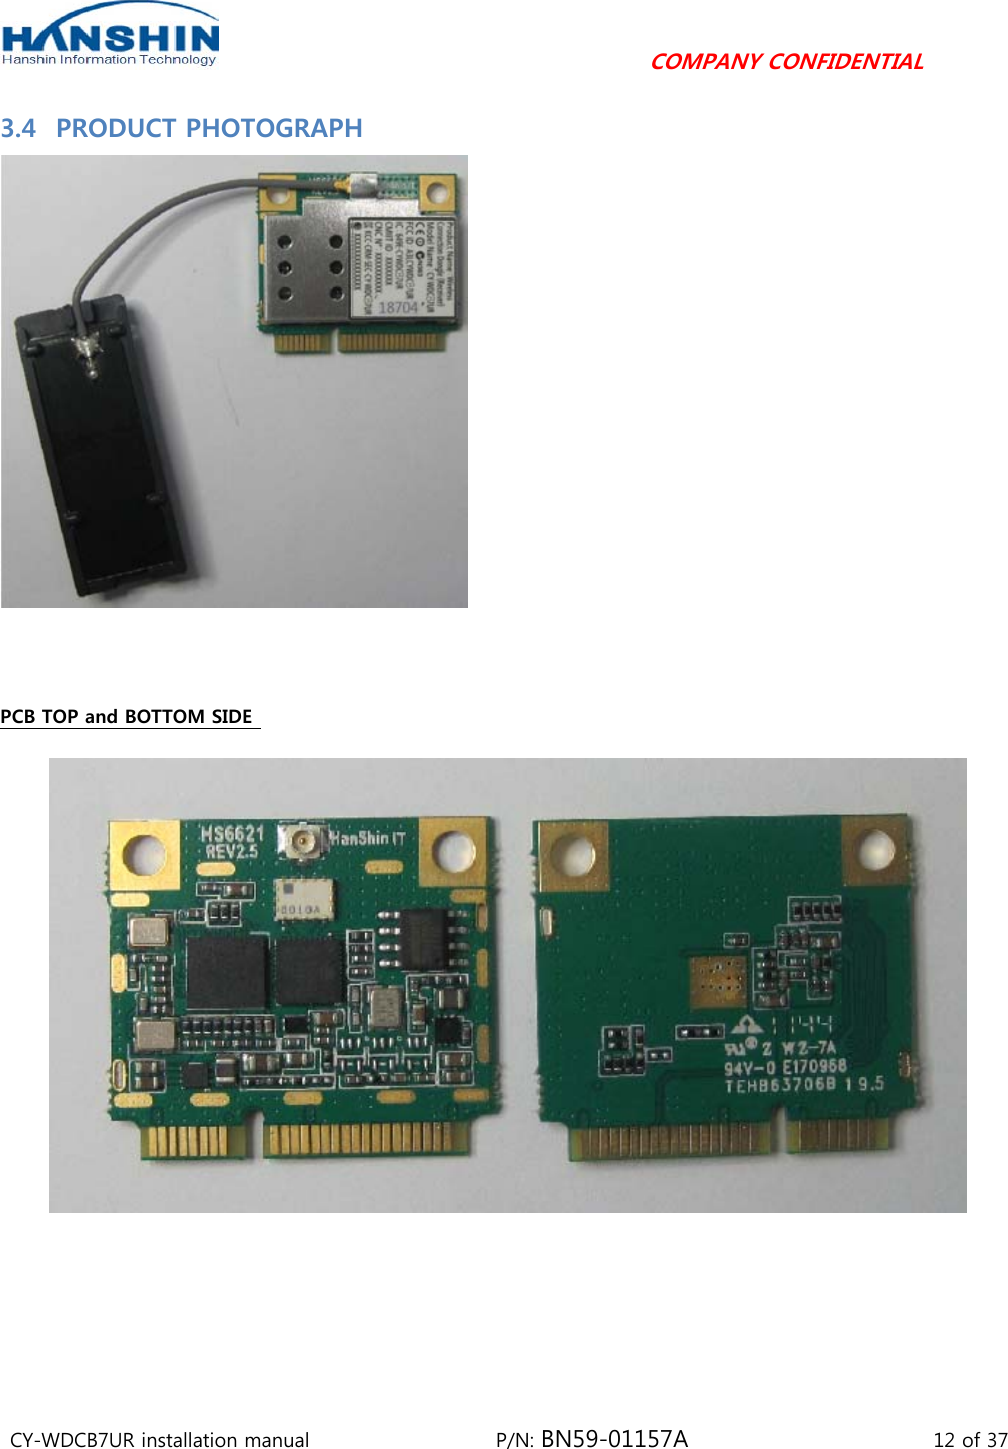                                         COMPANY CONFIDENTIAL CY-WDCB7UR installation manual                   P/N: BN59-01157A                         12 of 37 3.4 PRODUCT PHOTOGRAPH   PCB TOP and BOTTOM SIDE    